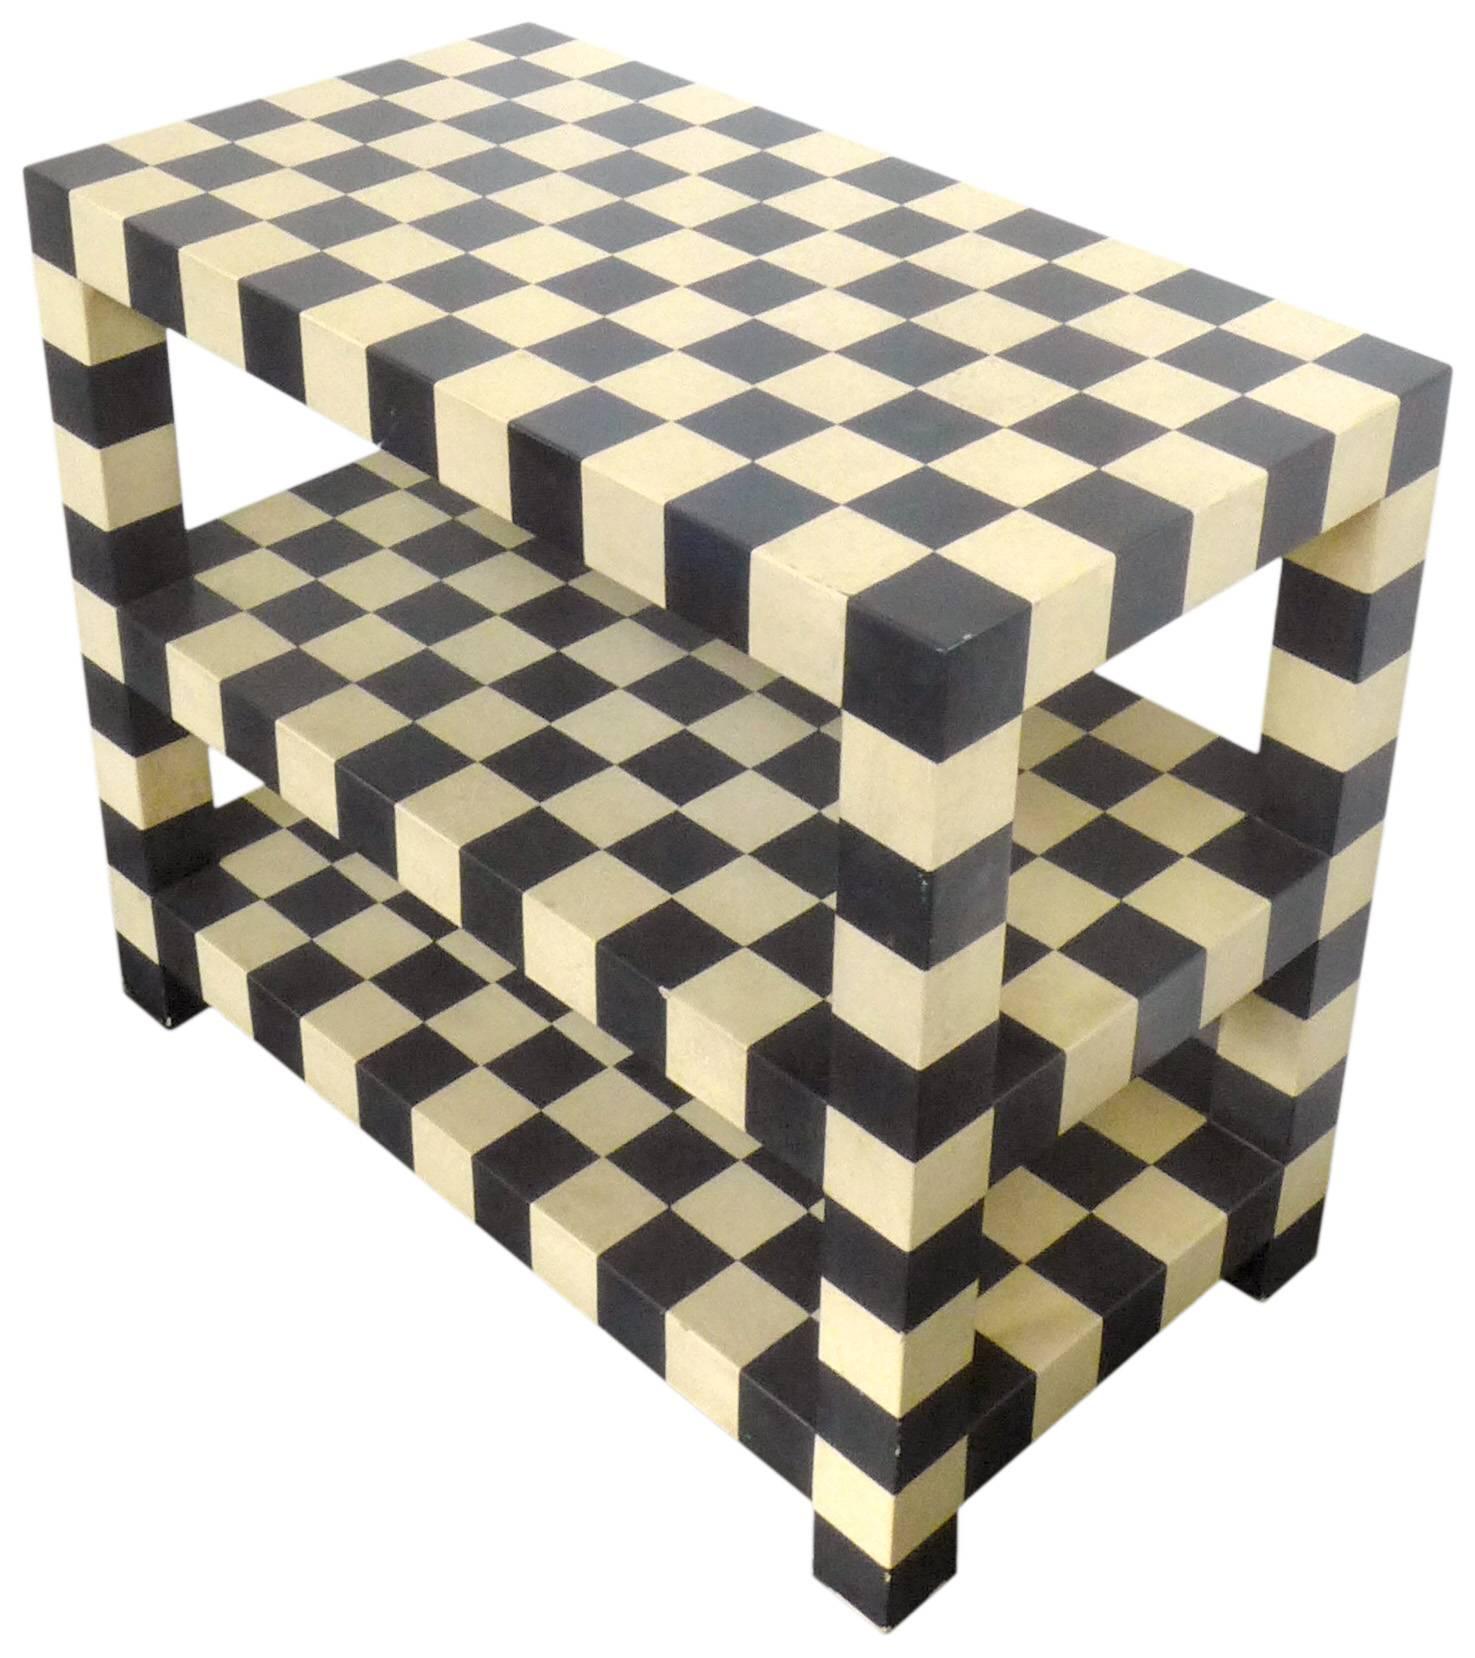 A spectacularly graphic, two-tiered checkerboard table. A strong, architectural form of lacquered wood, in alternating black and warm-white squares. Great scale and proportions. This table could function well as either a small console, occasional or